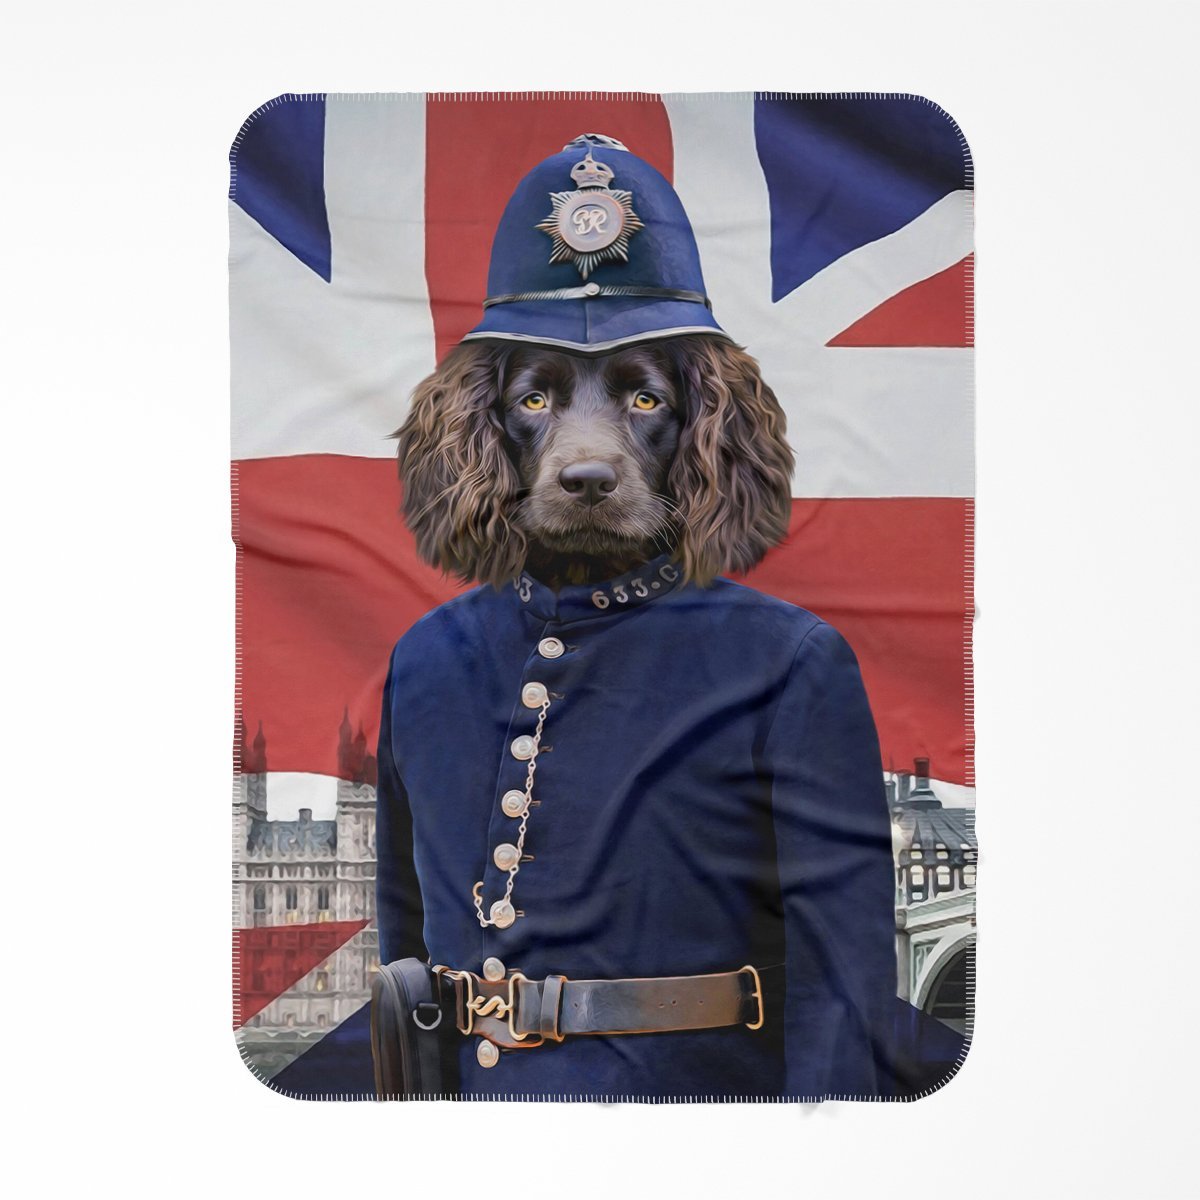 The British Police Officer: Custom Pet Blanket - Paw & Glory - #pet portraits# - #dog portraits# - #pet portraits uk#Pawandglory, Pet art blanket,personalized blanket dog, blanket with dogs face on it, your cat on a blanket, blanket with my dog on it, personalized dog fleece blankets